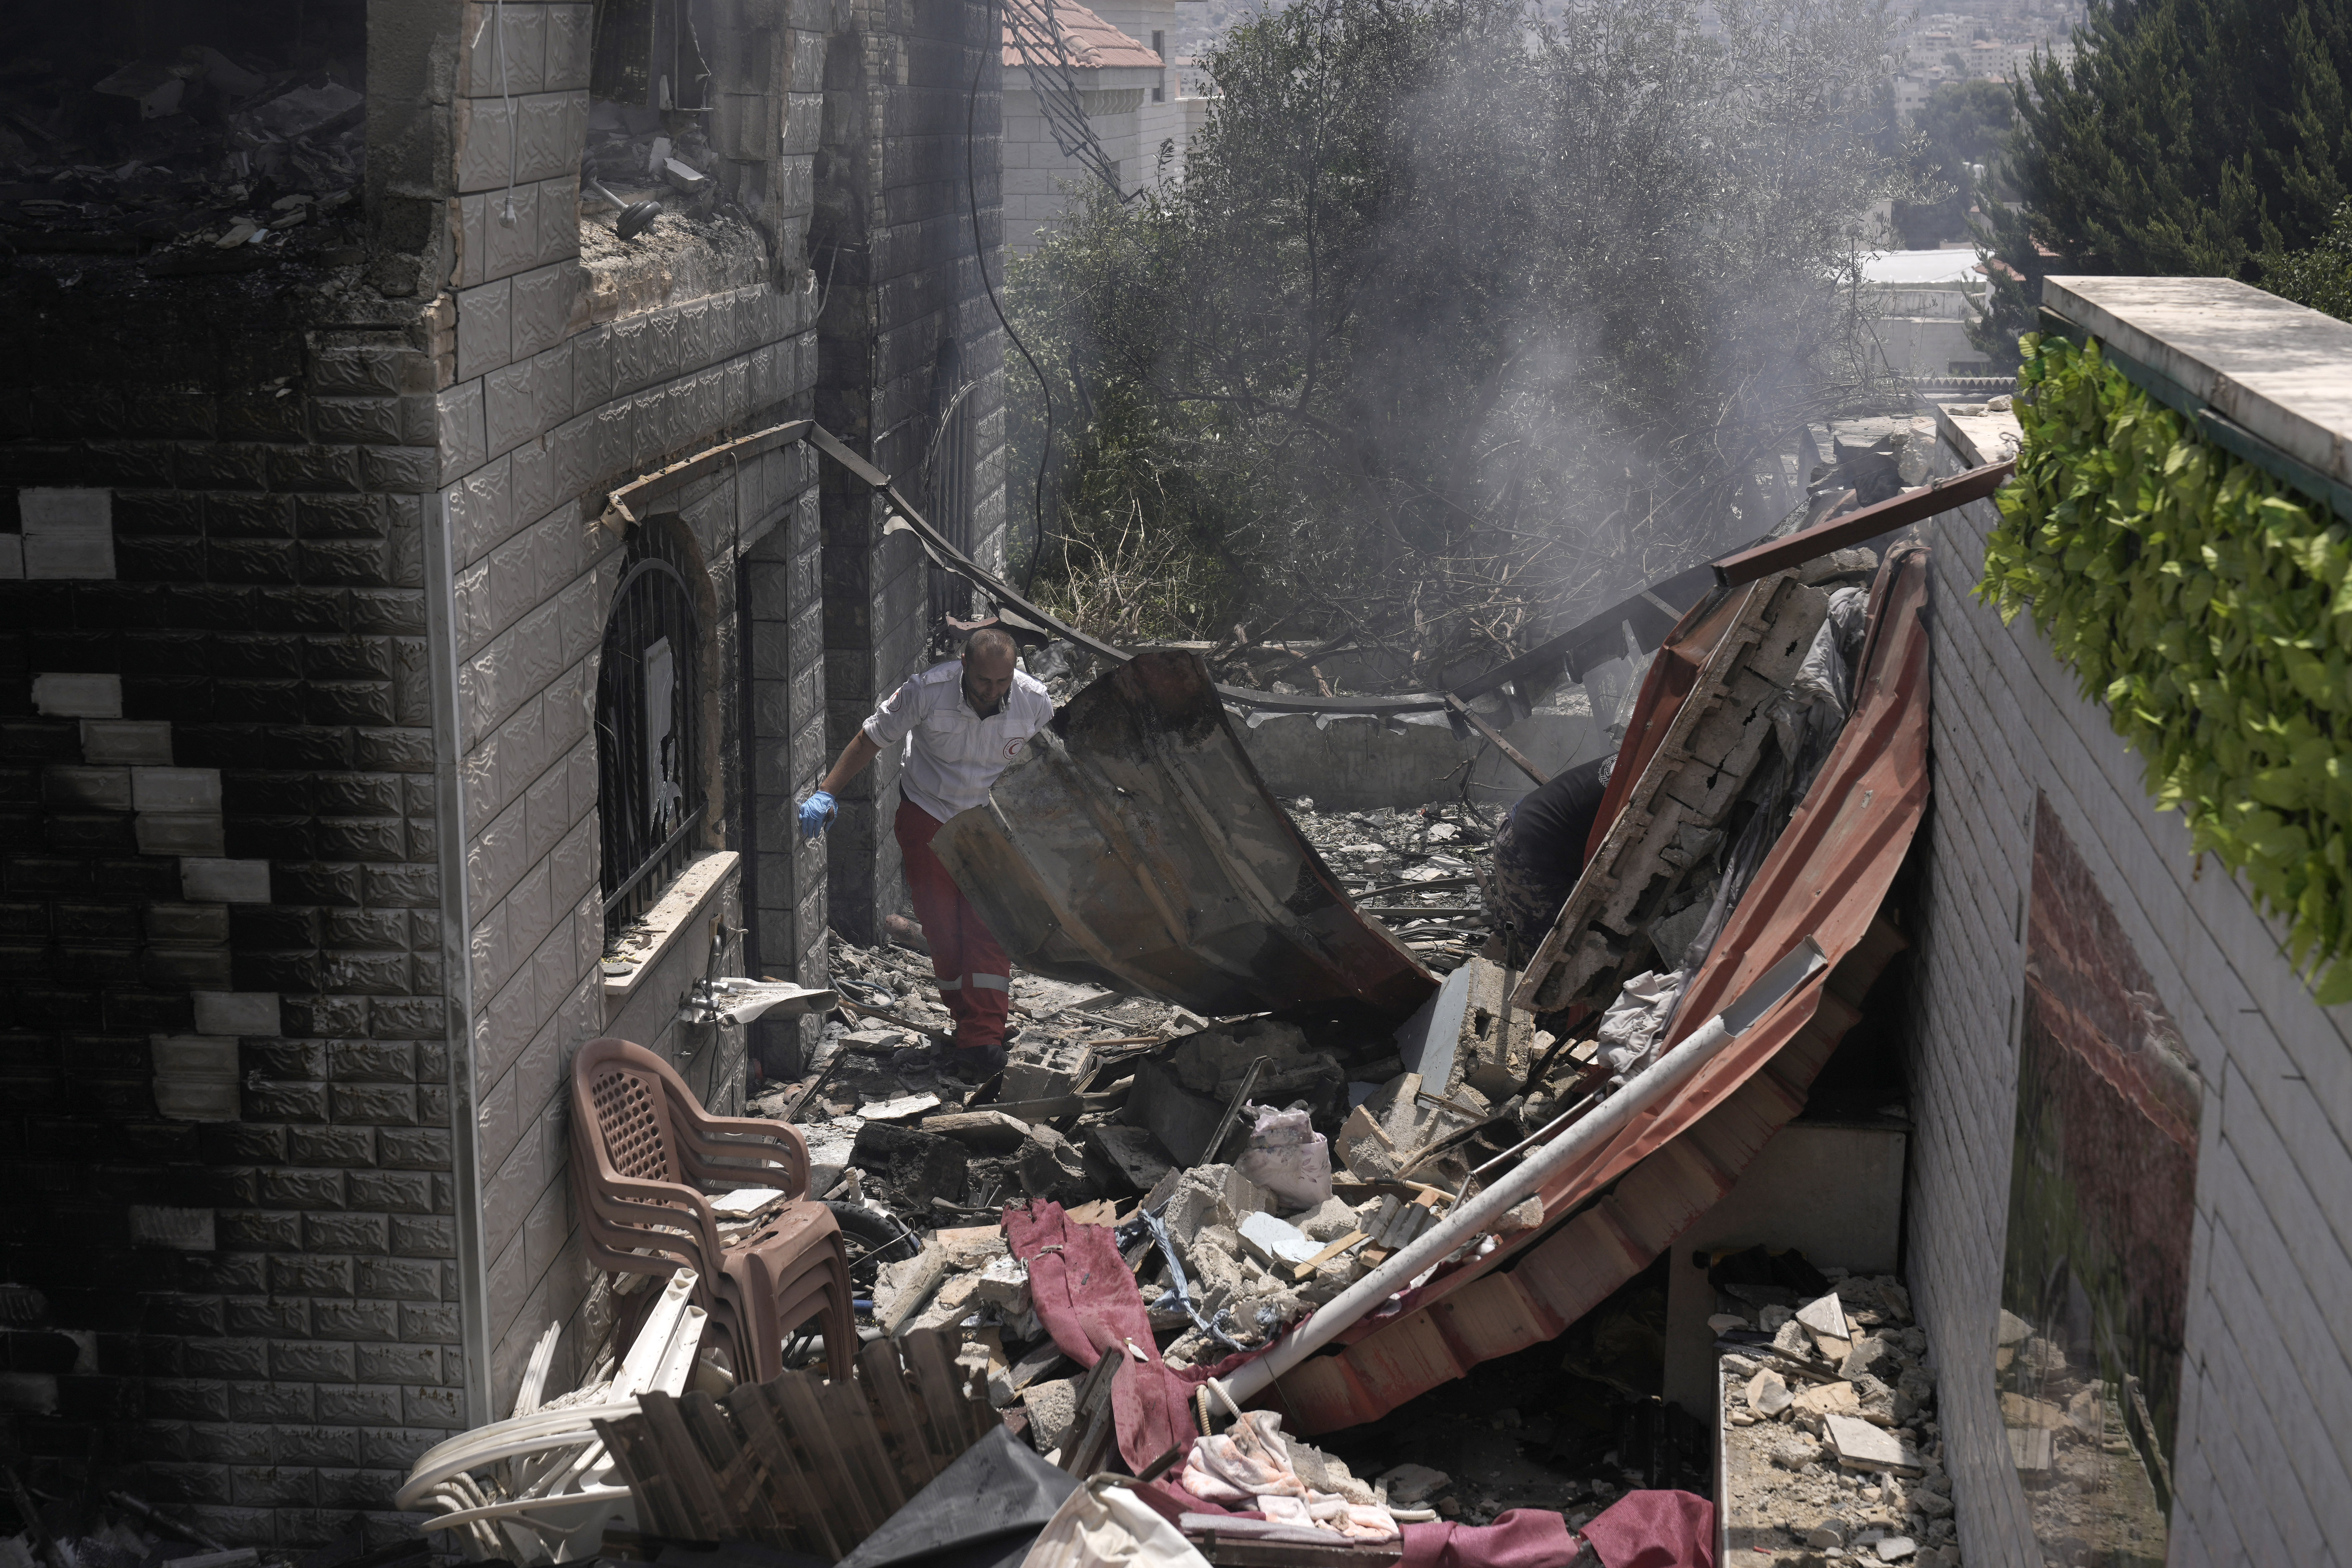 A Palestinian first responder navigates the rubble of a home destroyed in an Israeli military operation in the West Bank city of Jenin, Friday, July 5, 2024. The Israeli military said Friday it was conducting counterterrorism activity that included an airstrike in the area of the West Bank city of Jenin. Palestinian authorities said five people were killed. (AP Photo/Majdi Mohammed)